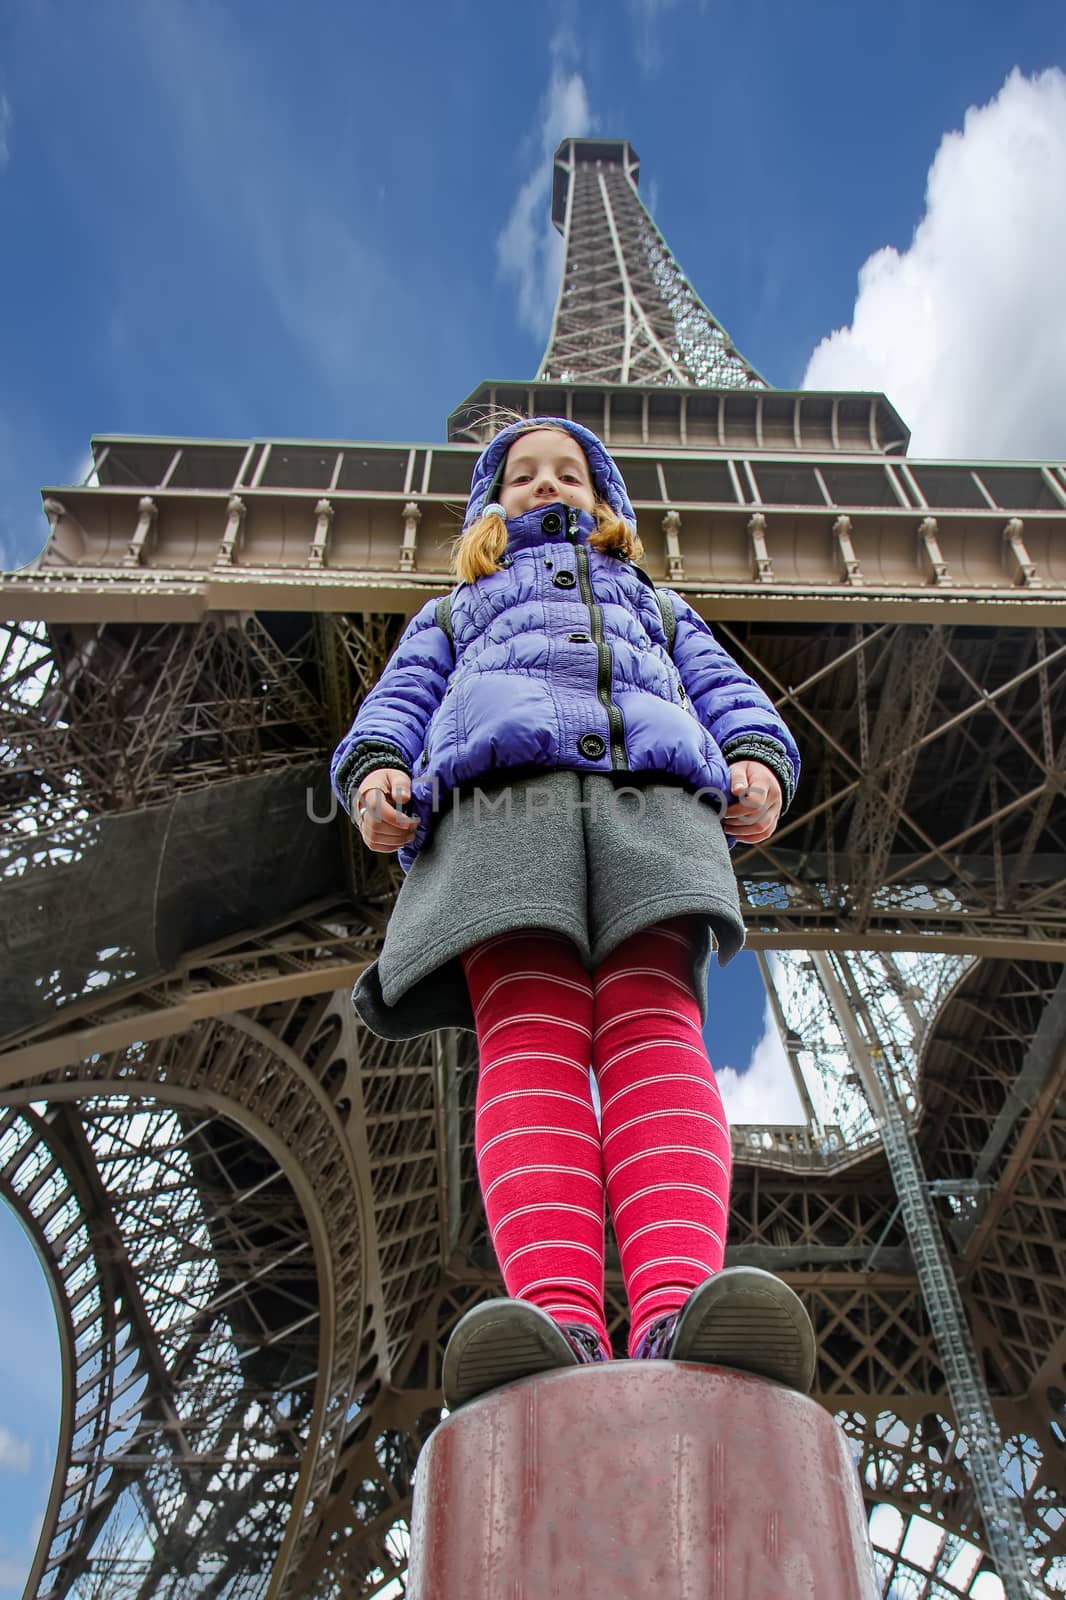 A girl against backdrop of the Eiffel Tower dressed in a blue jacket by 977_ReX_977